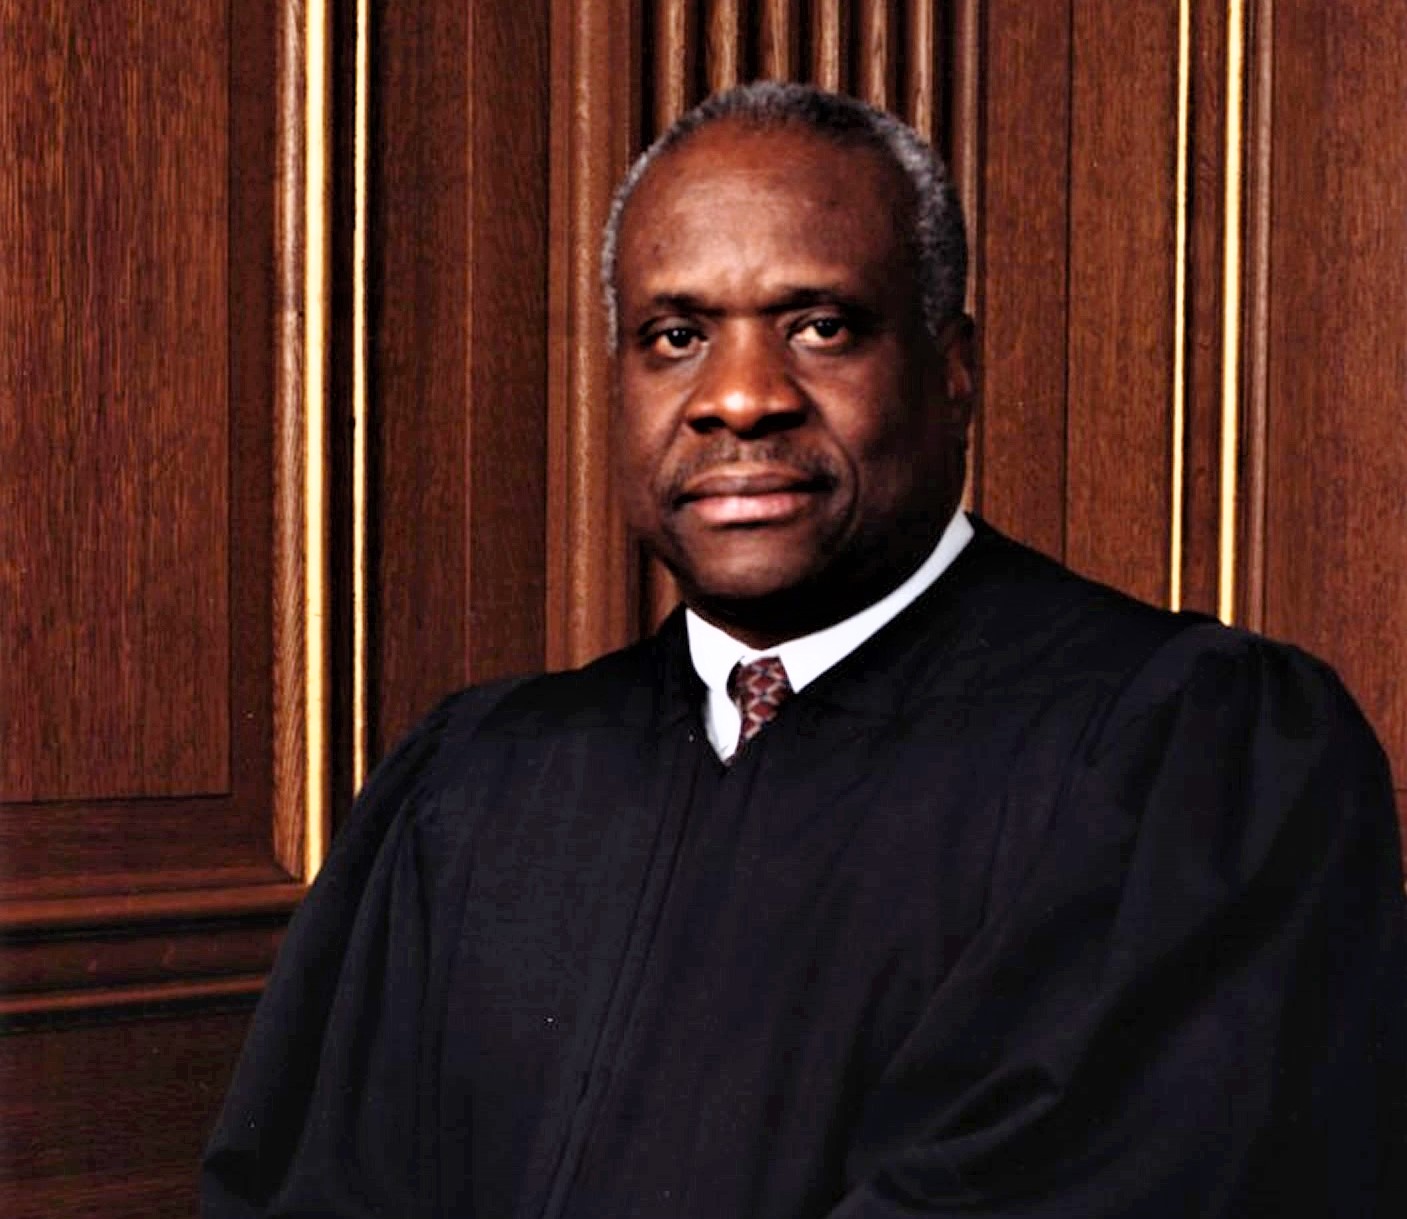 Washington Post: US Supreme Court Justice Thomas&#8217;s wife accepted over $80K from conservative legal activist